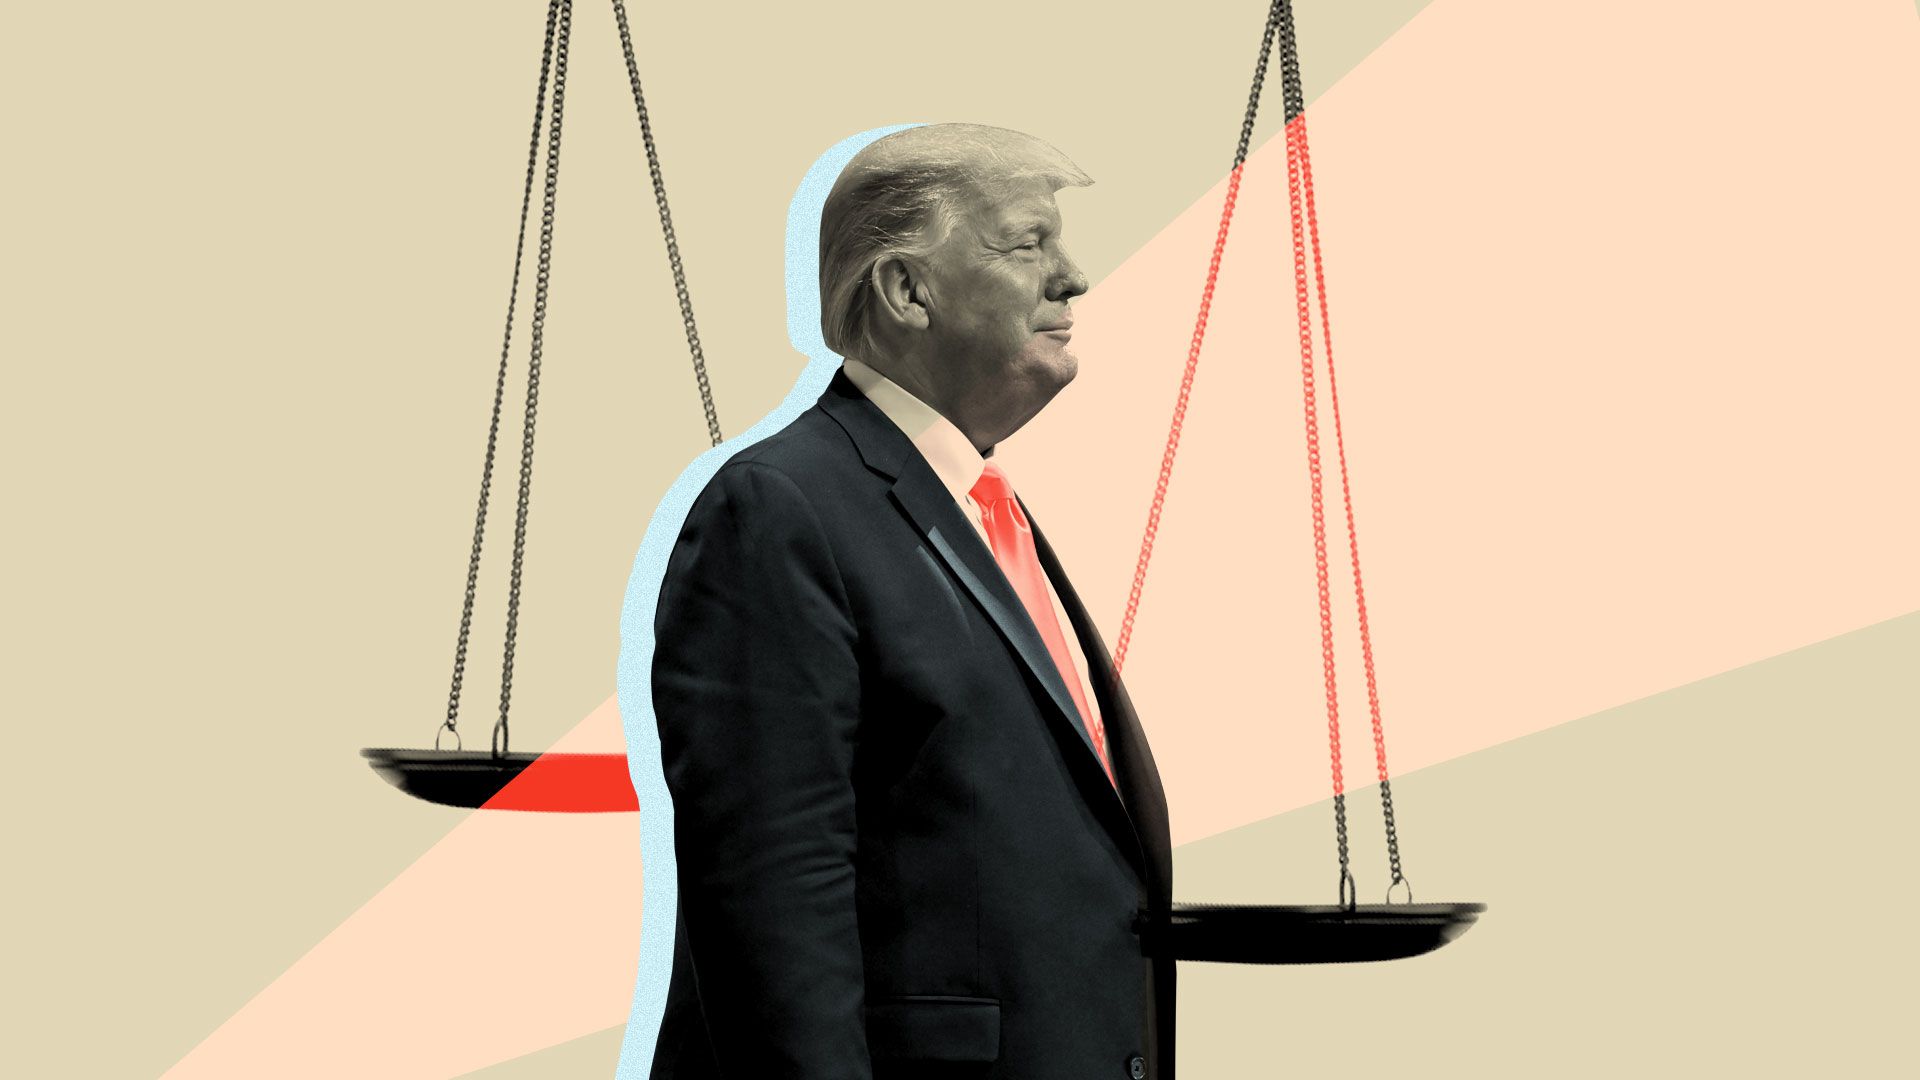 Illustration of Trump with scales of justice.